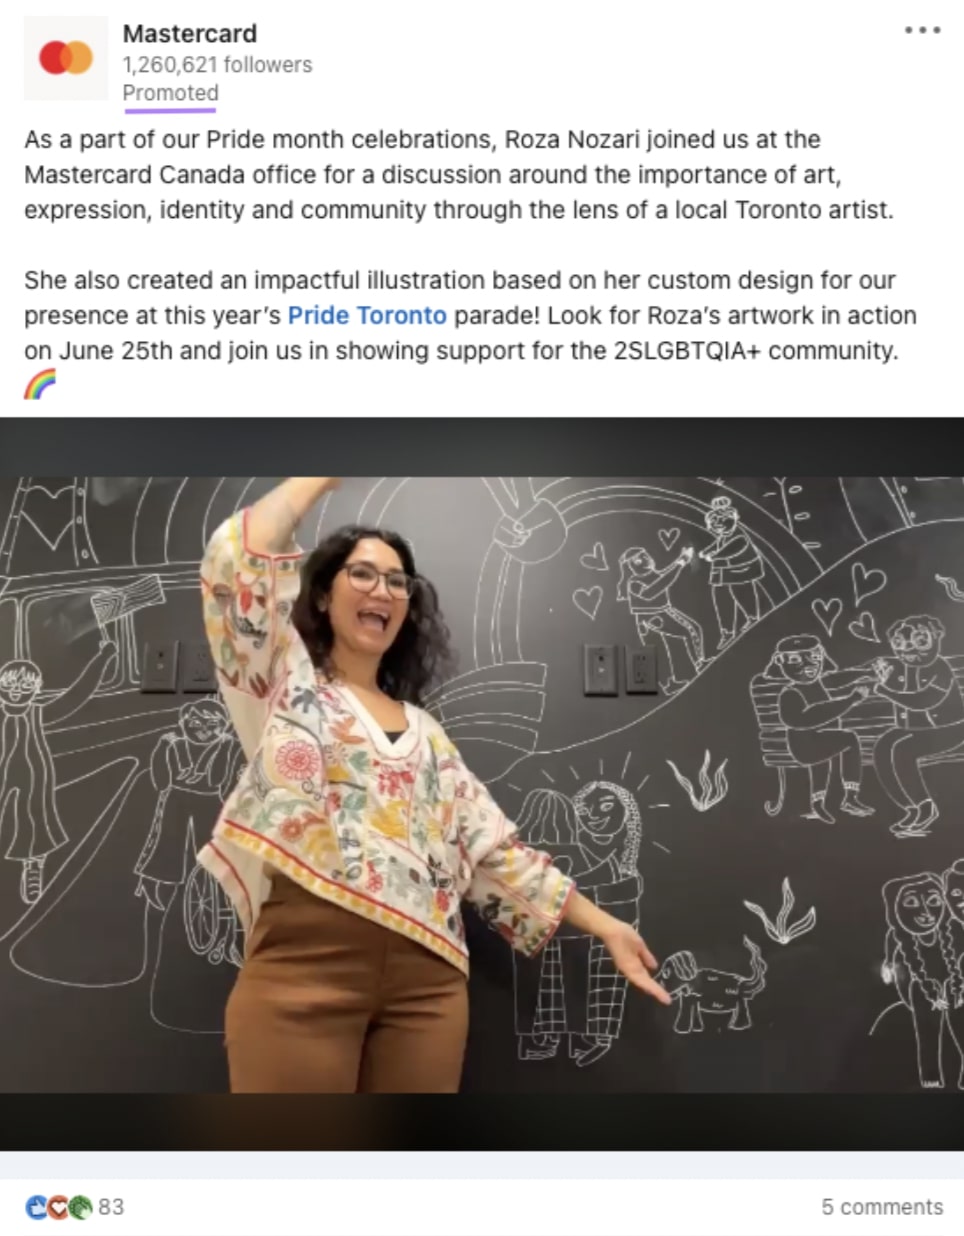 LinkedIn Pride month sponsored post from Mastercard with a woman in front of a chalkboard